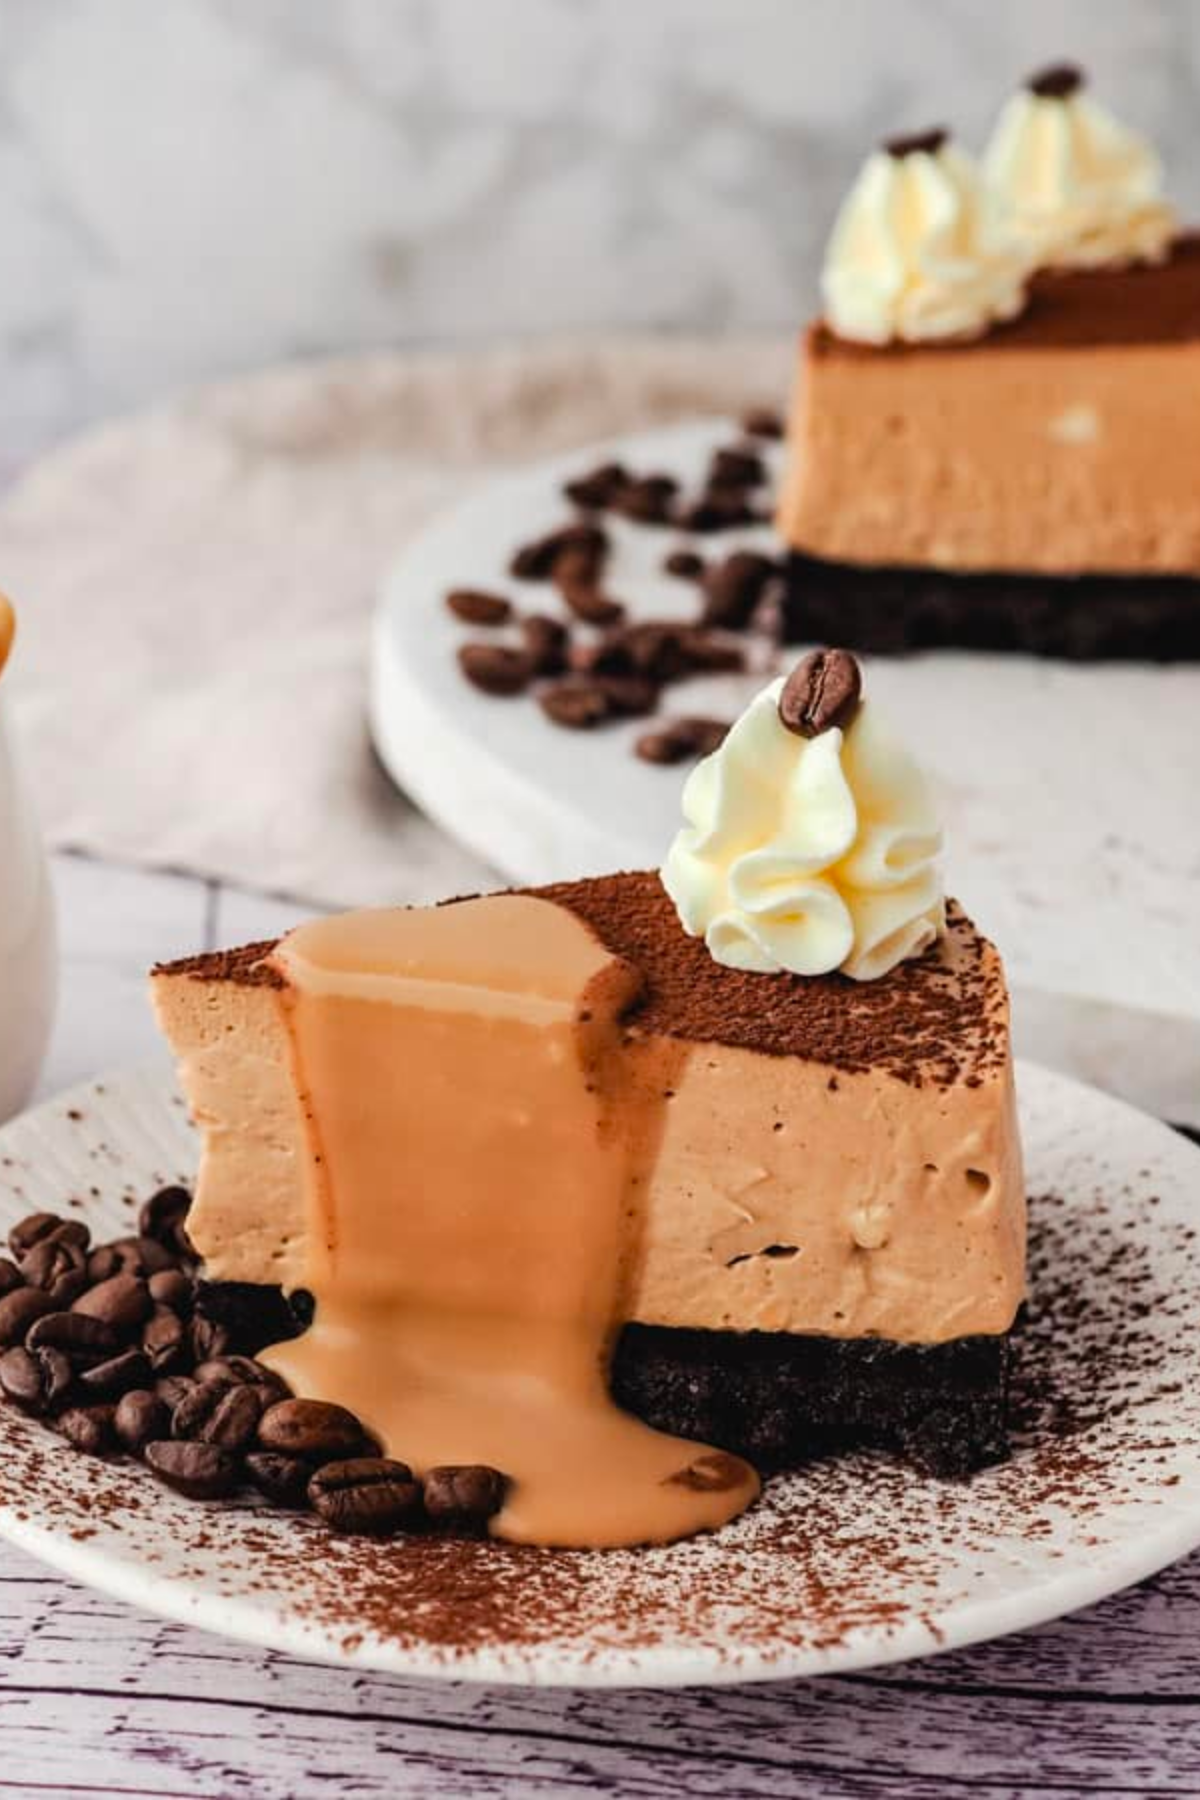 Slice of coffee cheesecake on plate.